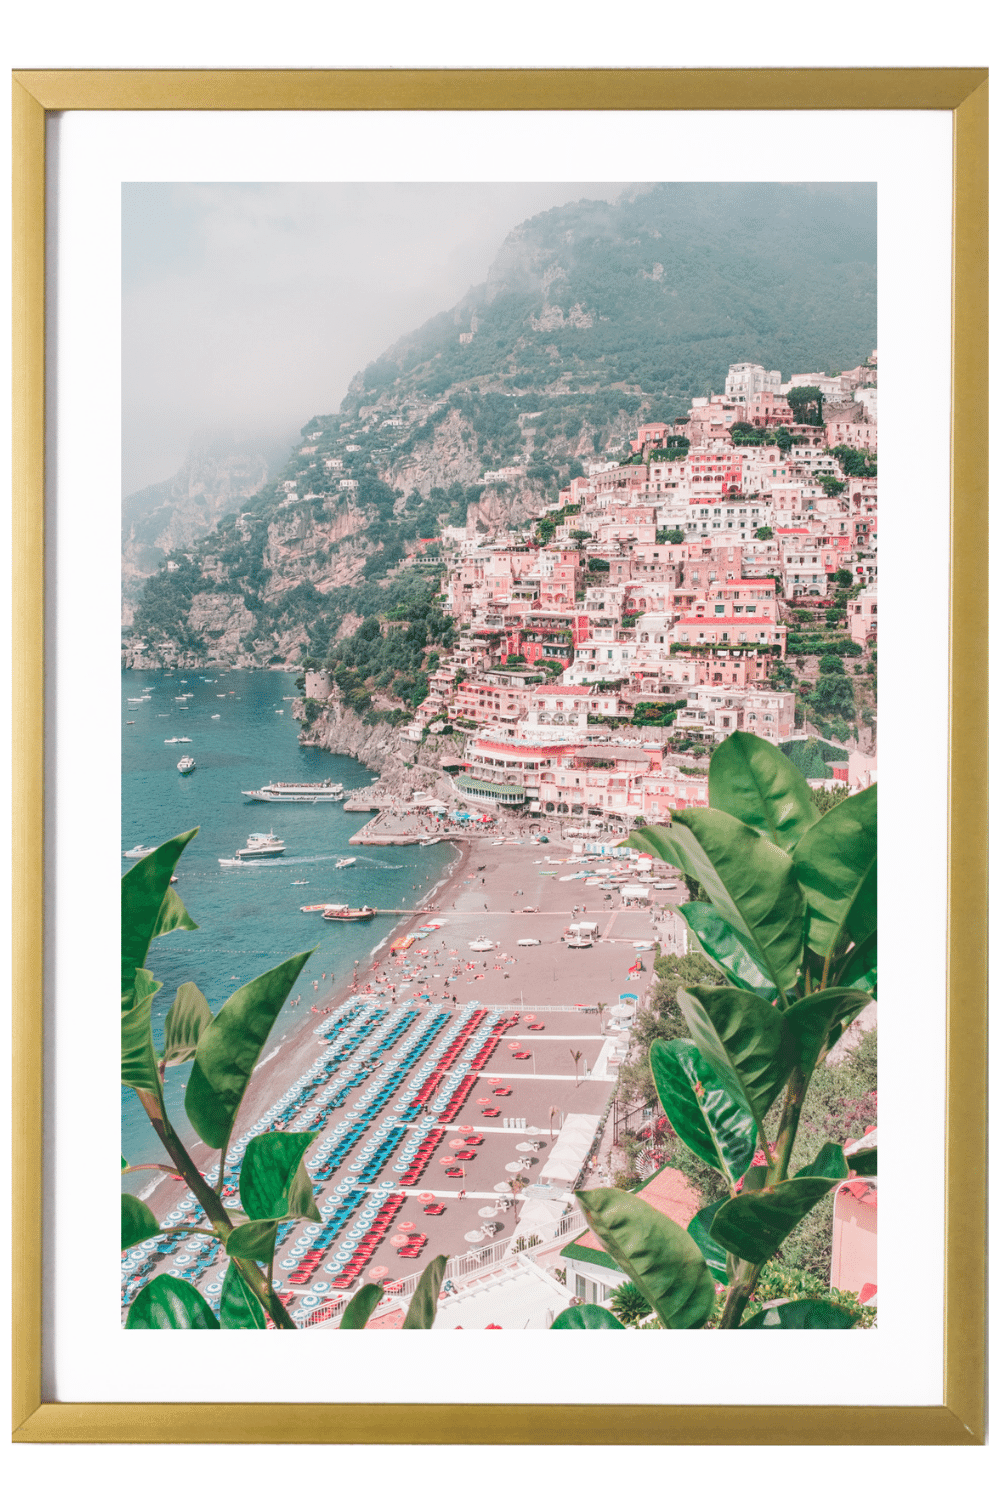 30x40 inches ART PRINT with frame size perpective, visionairess